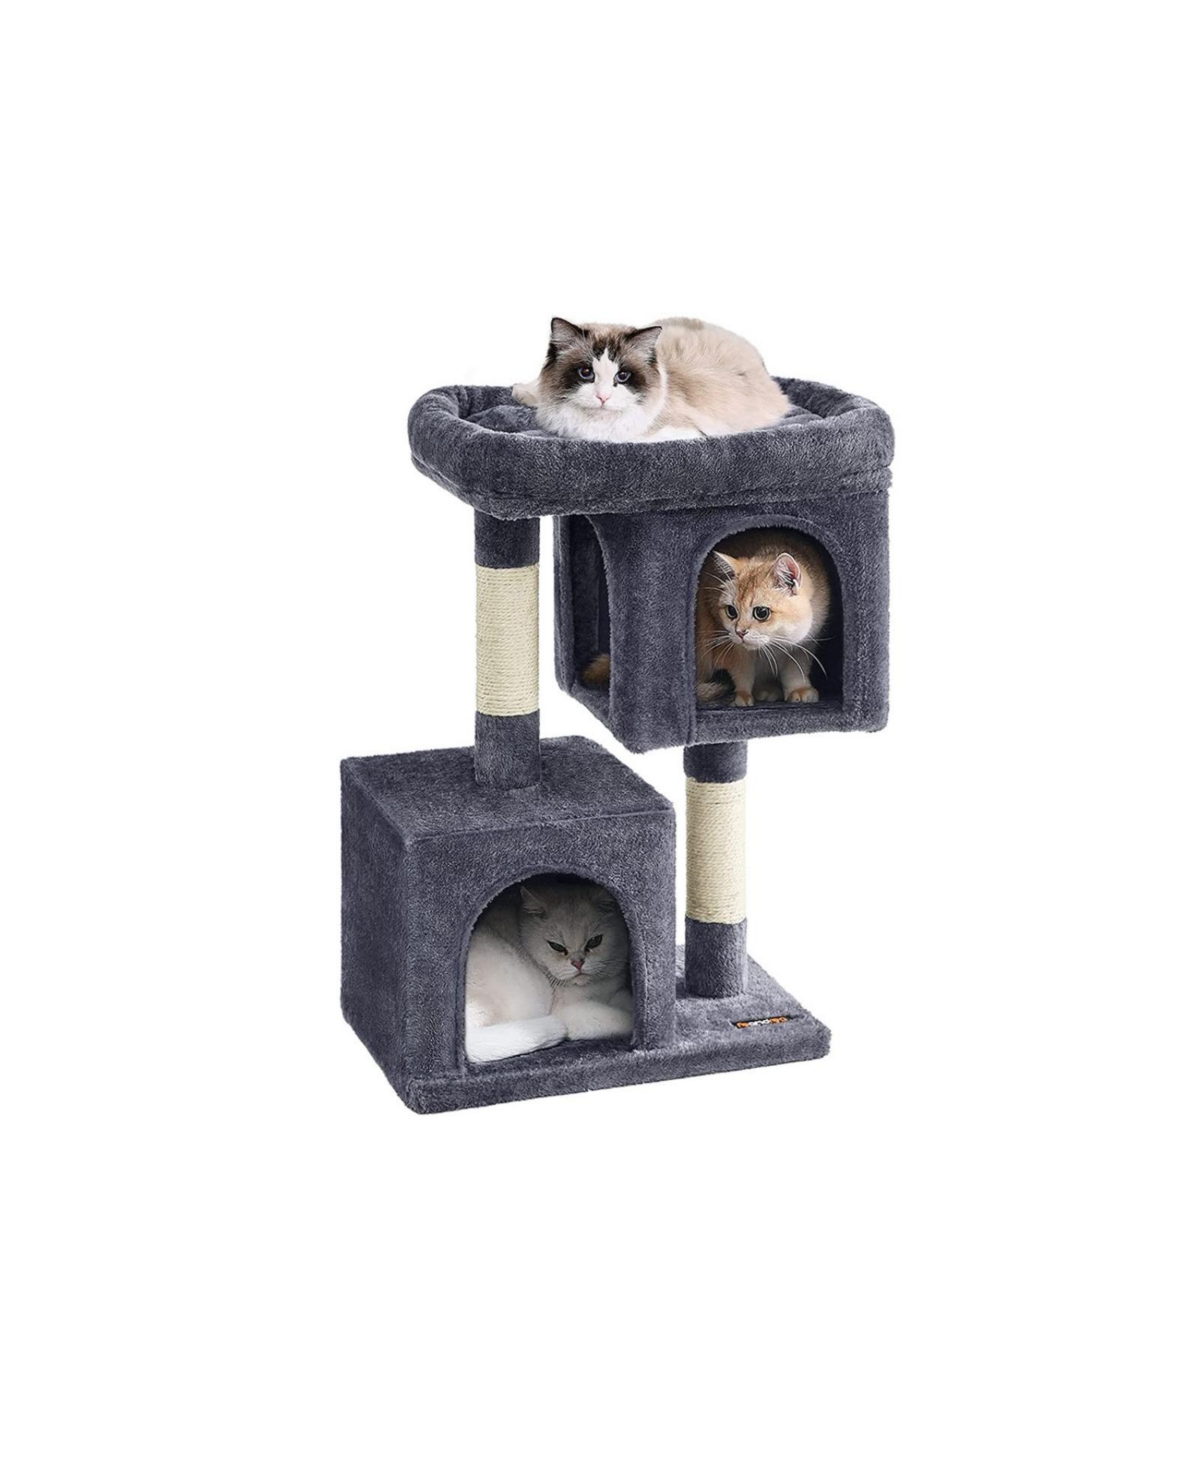 Cat Tree With Plush Condos, Sisal-covered Scratching Posts, Cat Furniture For Kittens - Beige